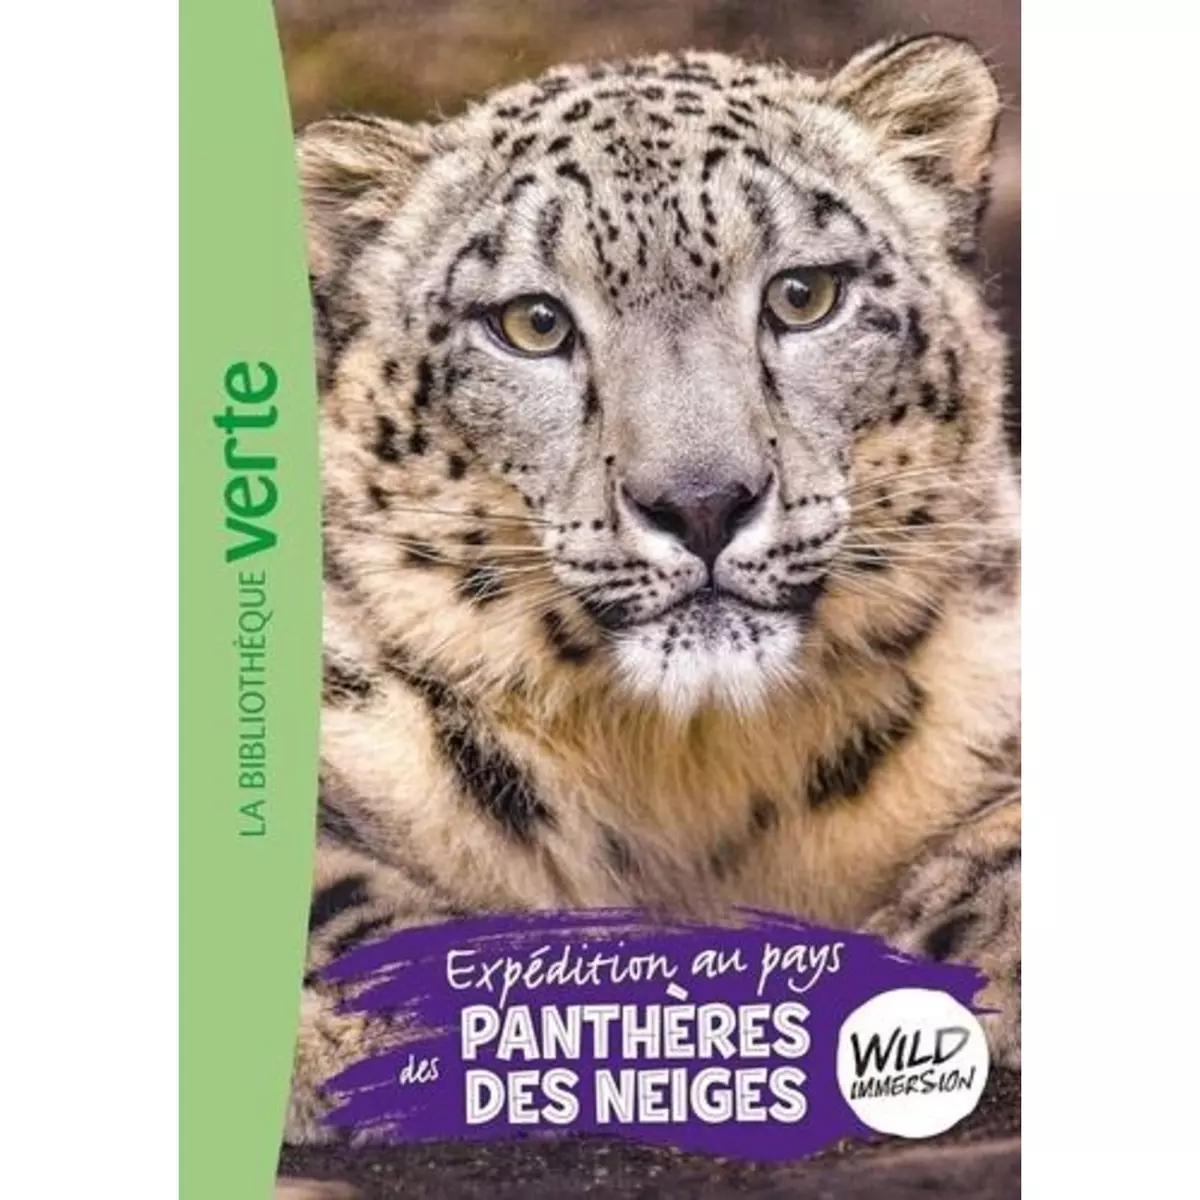  WILD IMMERSION TOME 17 : EXPEDITION AU PAYS DES PANTHERES DES NEIGES, Ruter Pascal